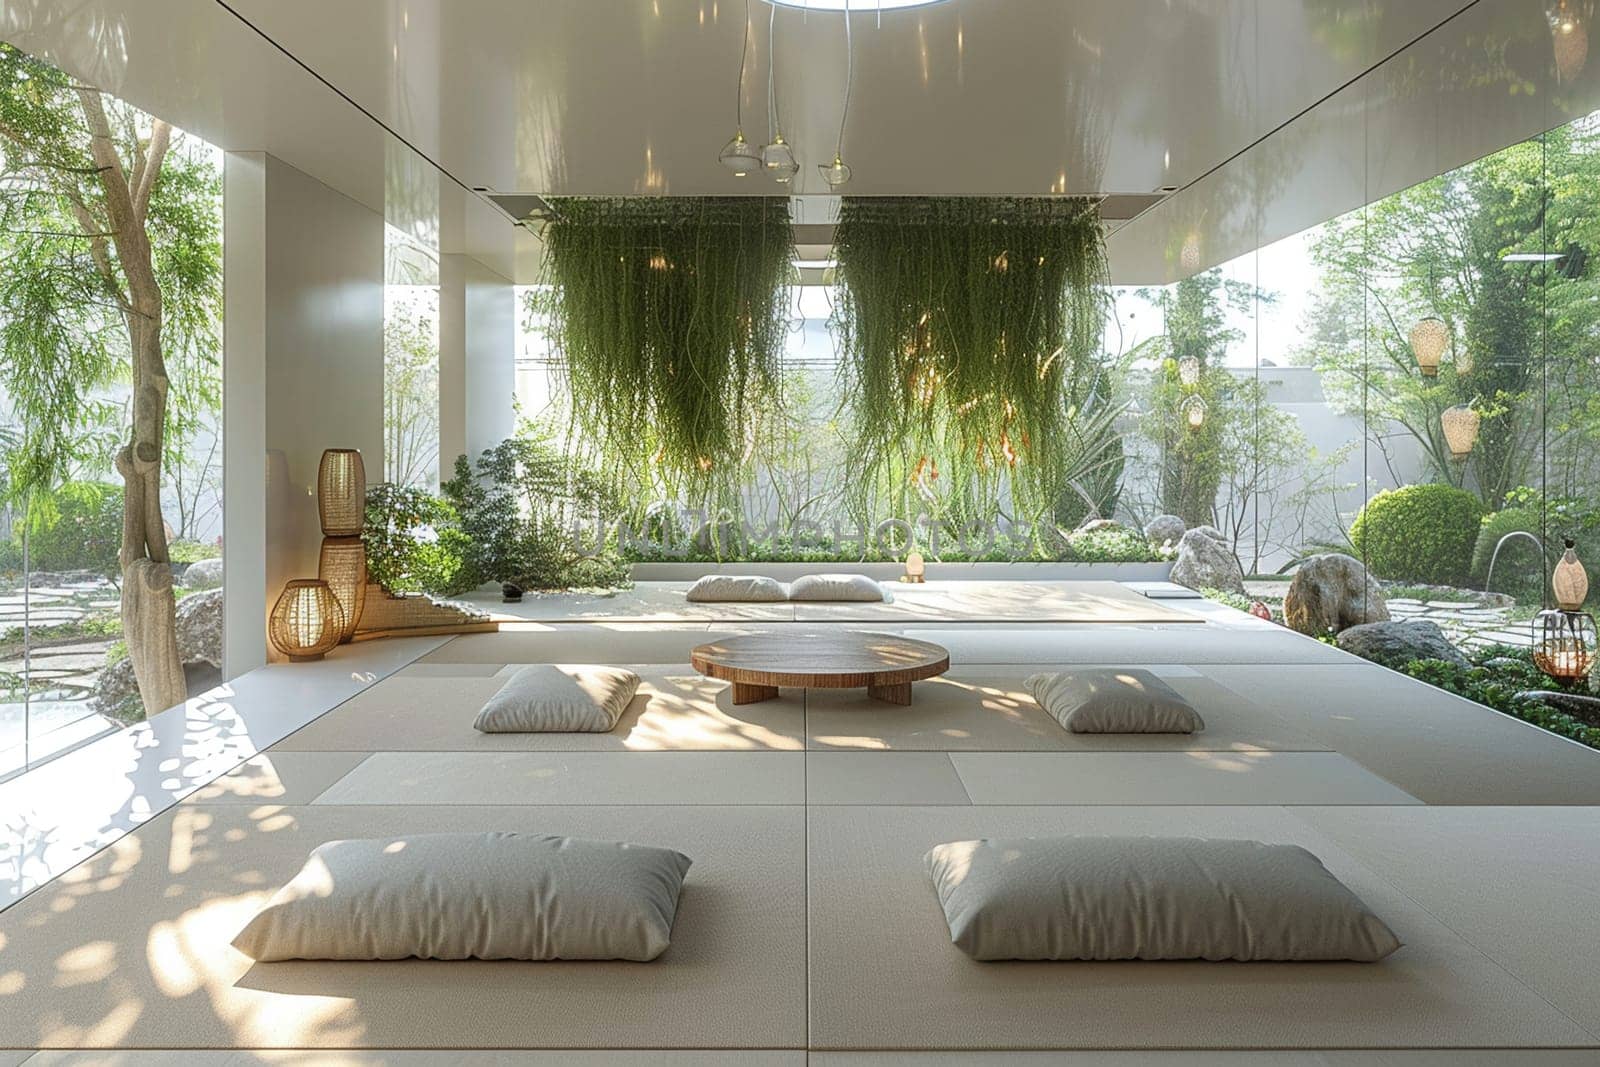 Minimalist meditation space with simple lines and a sense of calmhigh detailed